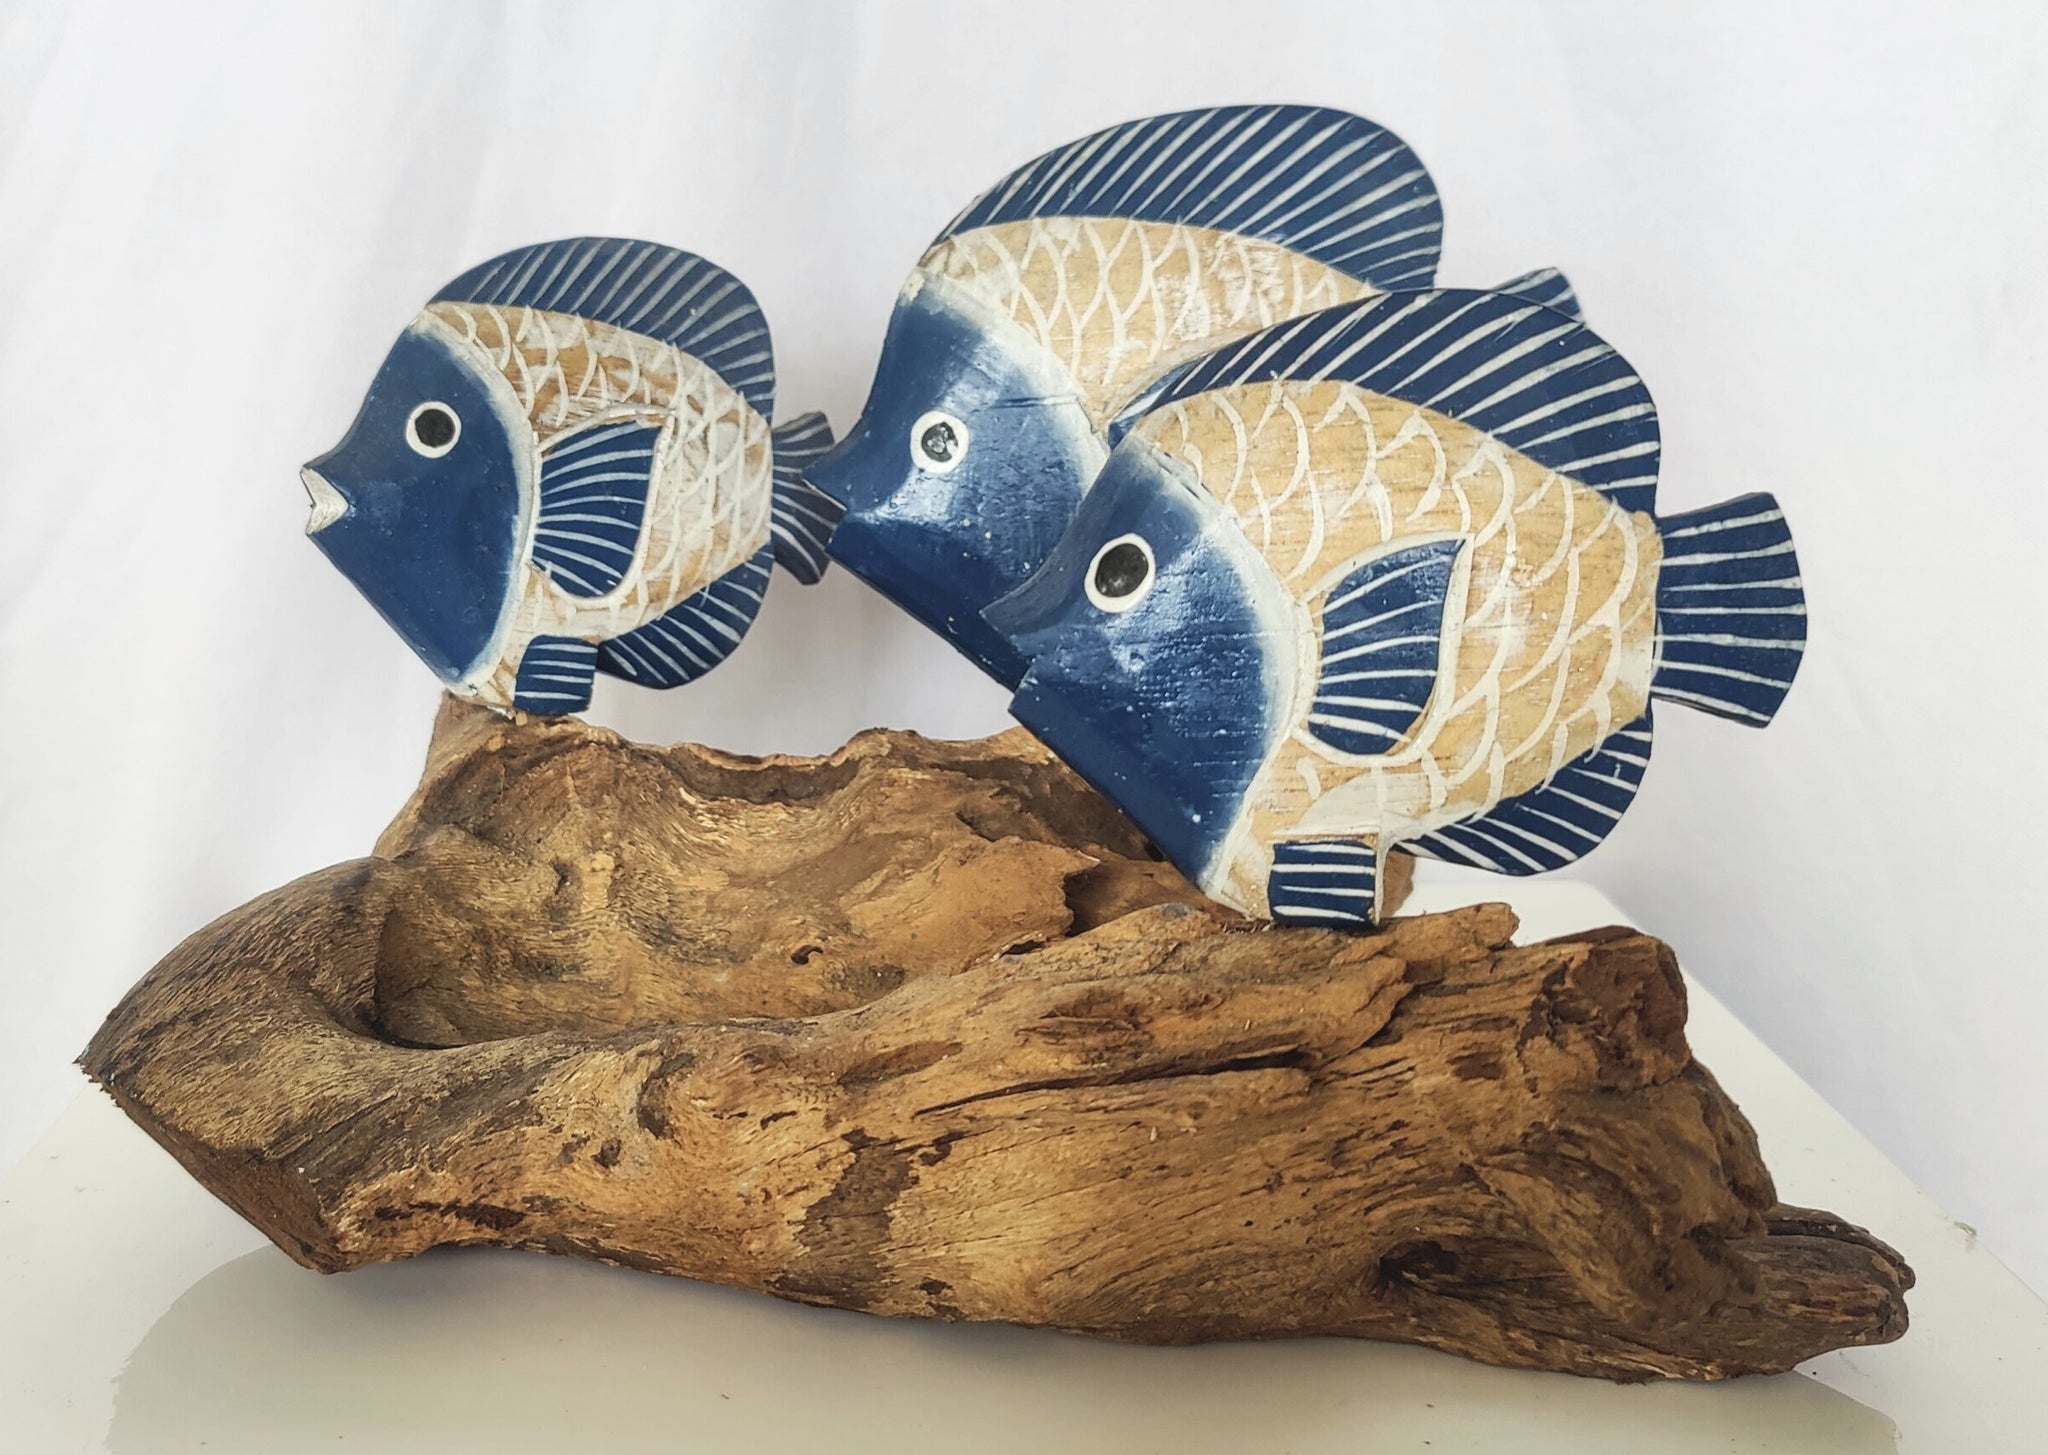 Home Decor. Tabletop Showpiece. Hand Carved Wooden Fish Statuettes